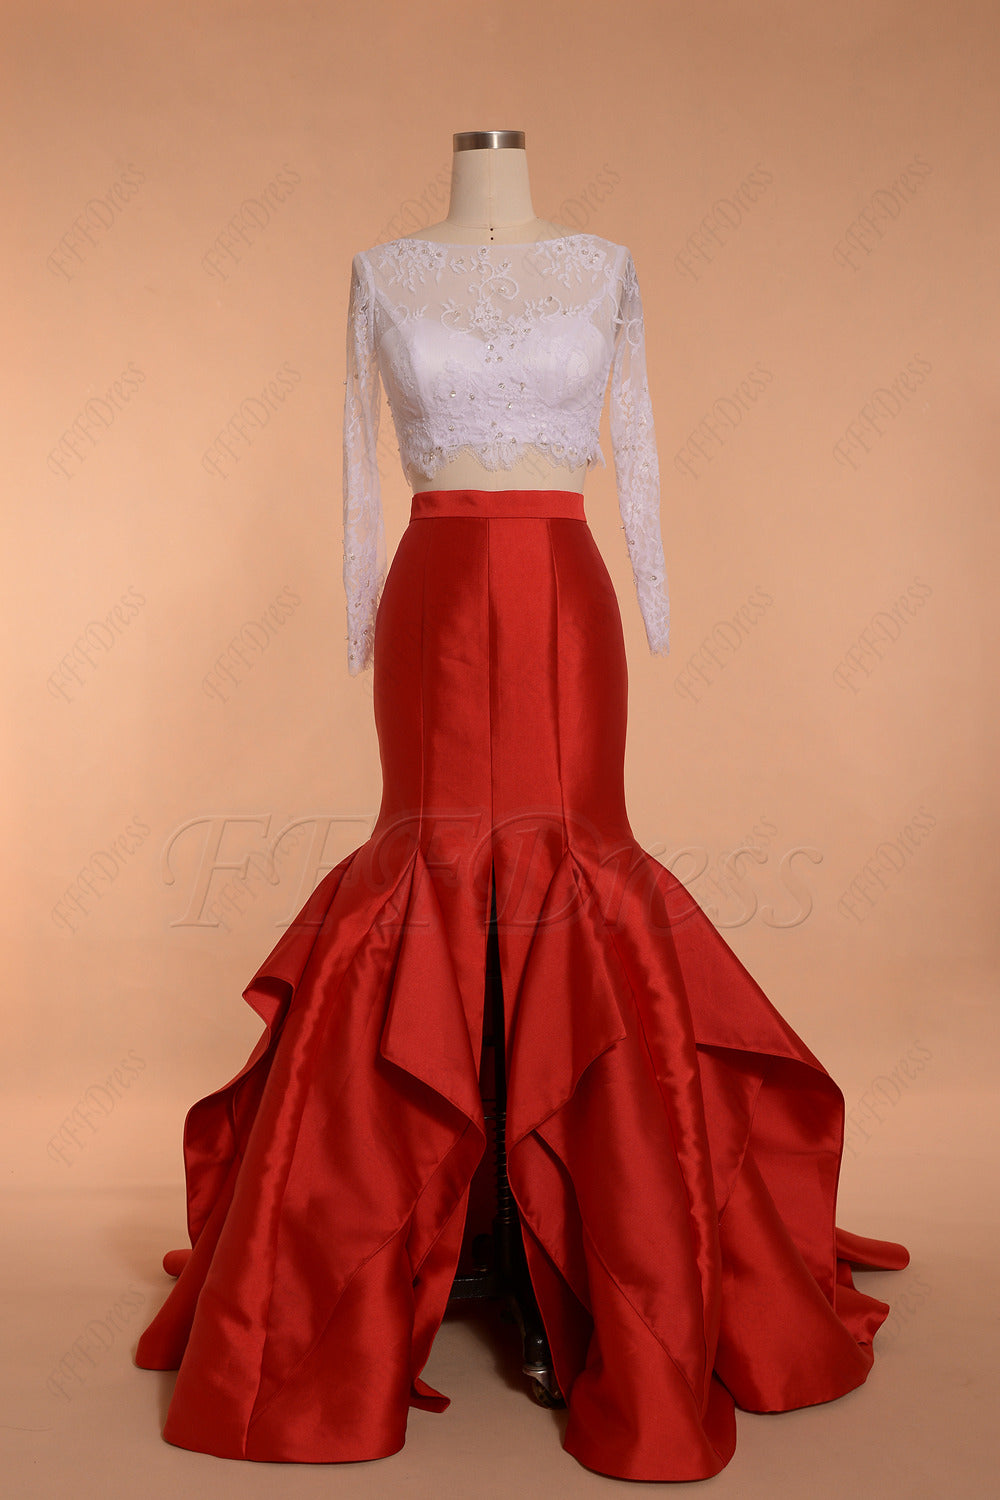 https://fffdress.com/products/white-red-two-piece-prom-dresses-long-sleeves-mermaid?_pos=1&_sid=c1335ff2a&_ss=r